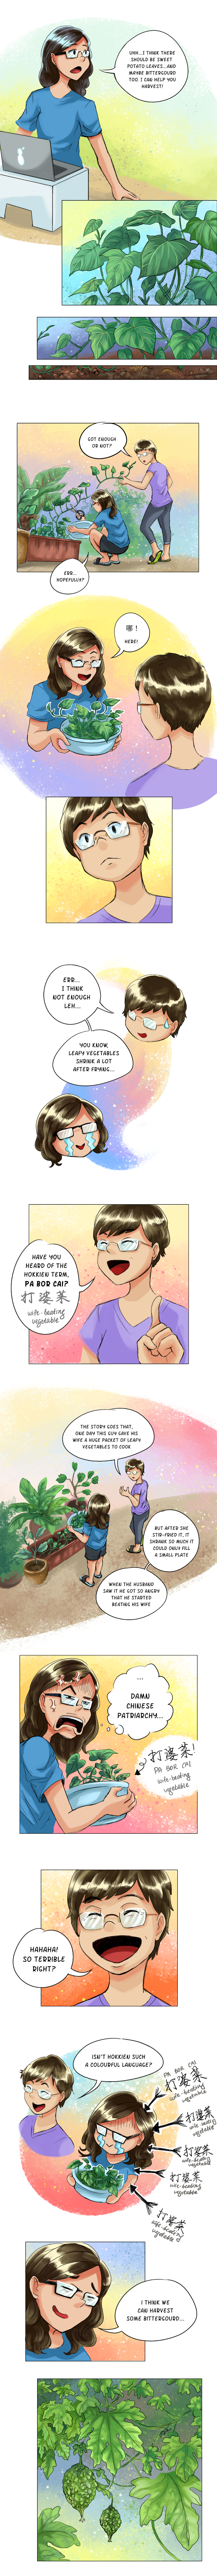 Scenes from episode 5 of my webcomic Refu(SE/SL/GE), showing my mom explain the Hokkien term 'Pa Bor Cai' to me, and me being pissed off at Chinese patriarchy